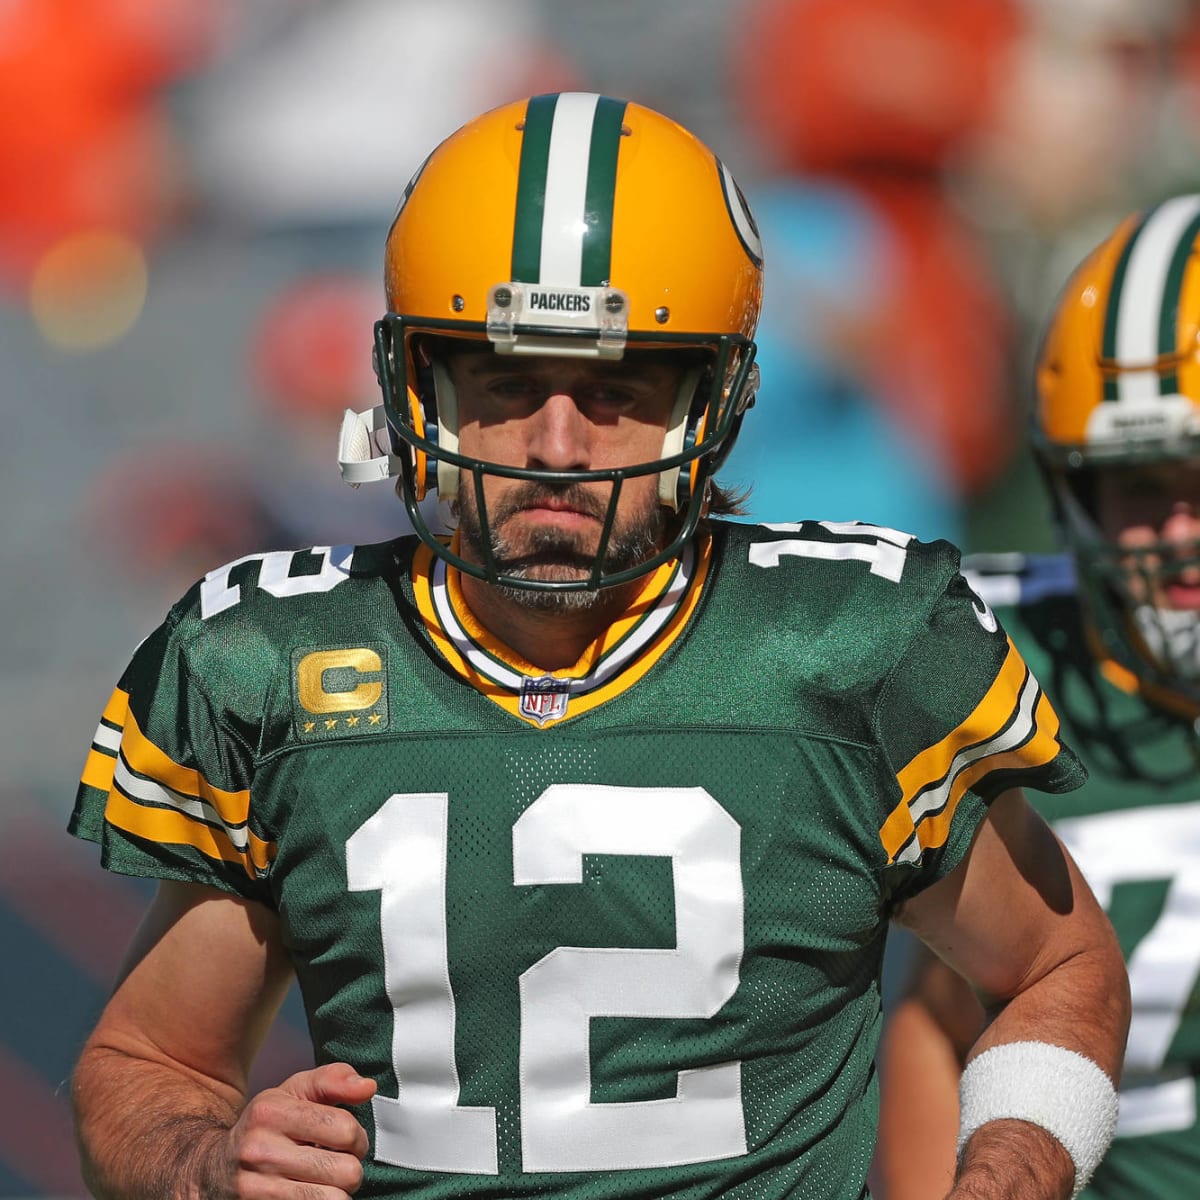 Eagles fans are NFL's best trash talkers according to Aaron Rodgers